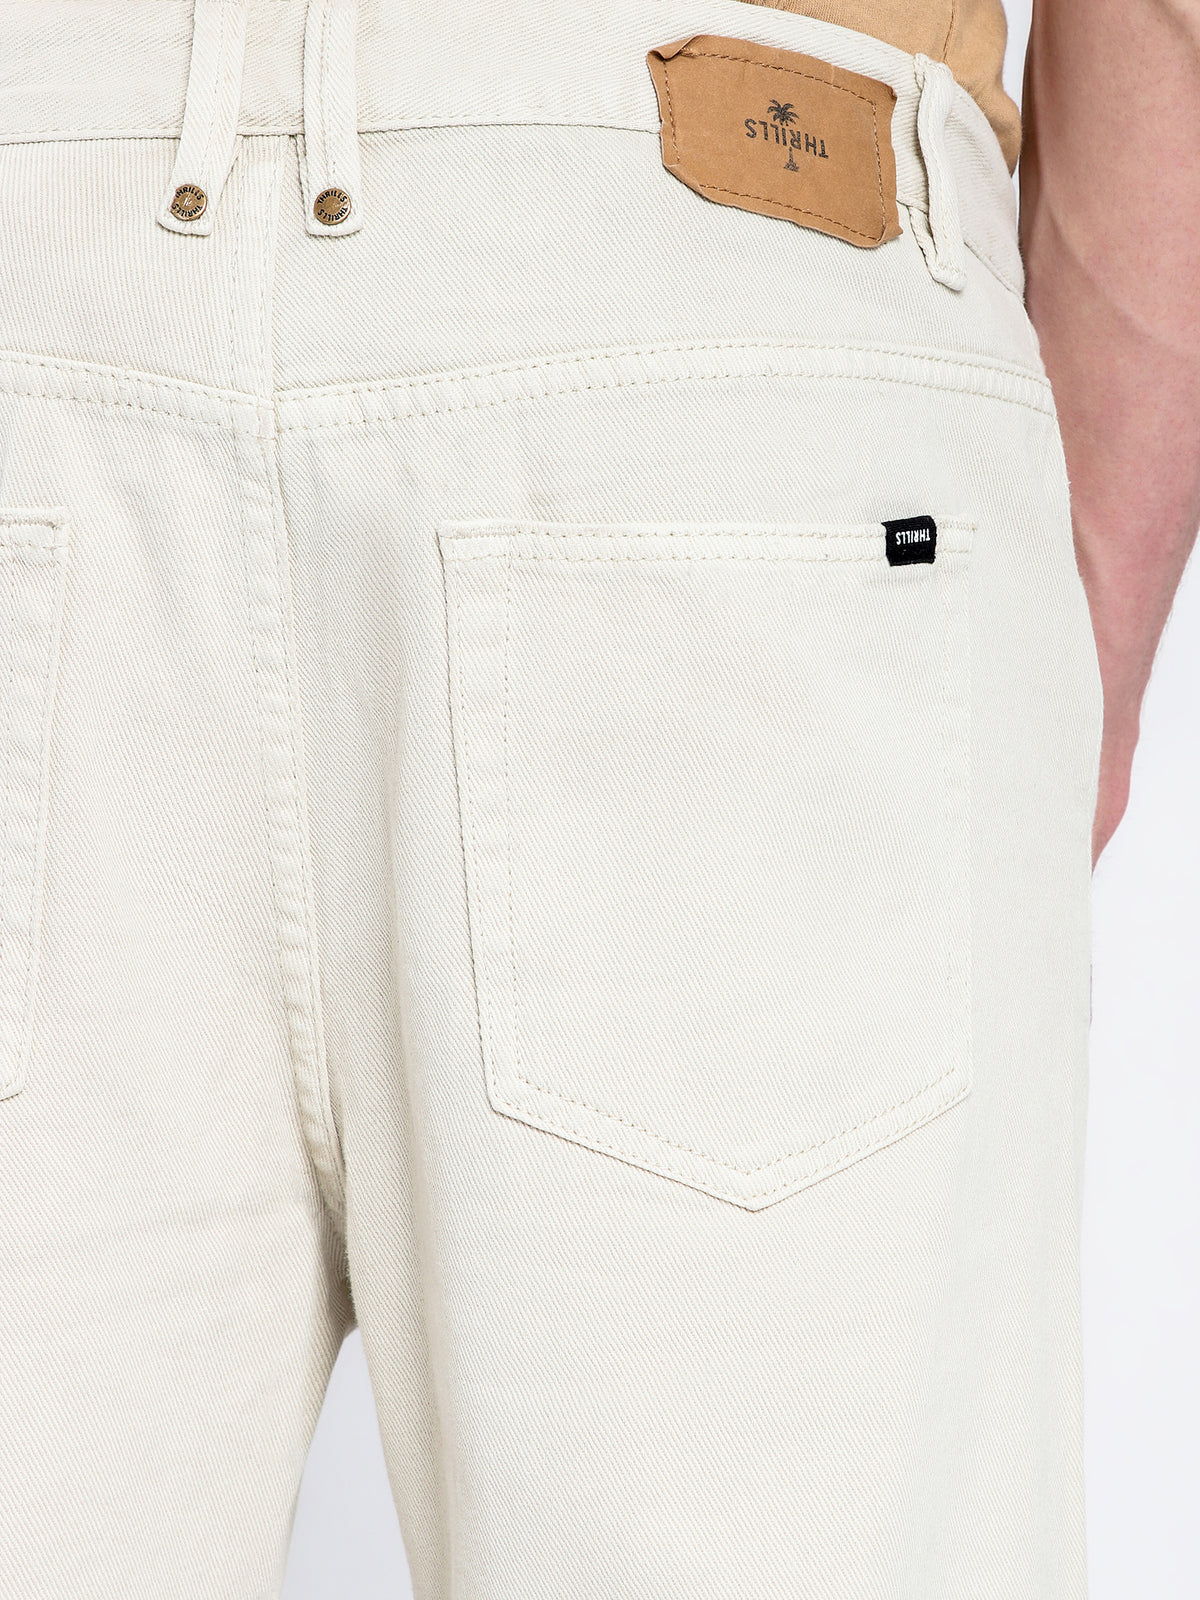 Drilled Chopped 5-Pocket Pants in Dirty White Denim - Glue Store